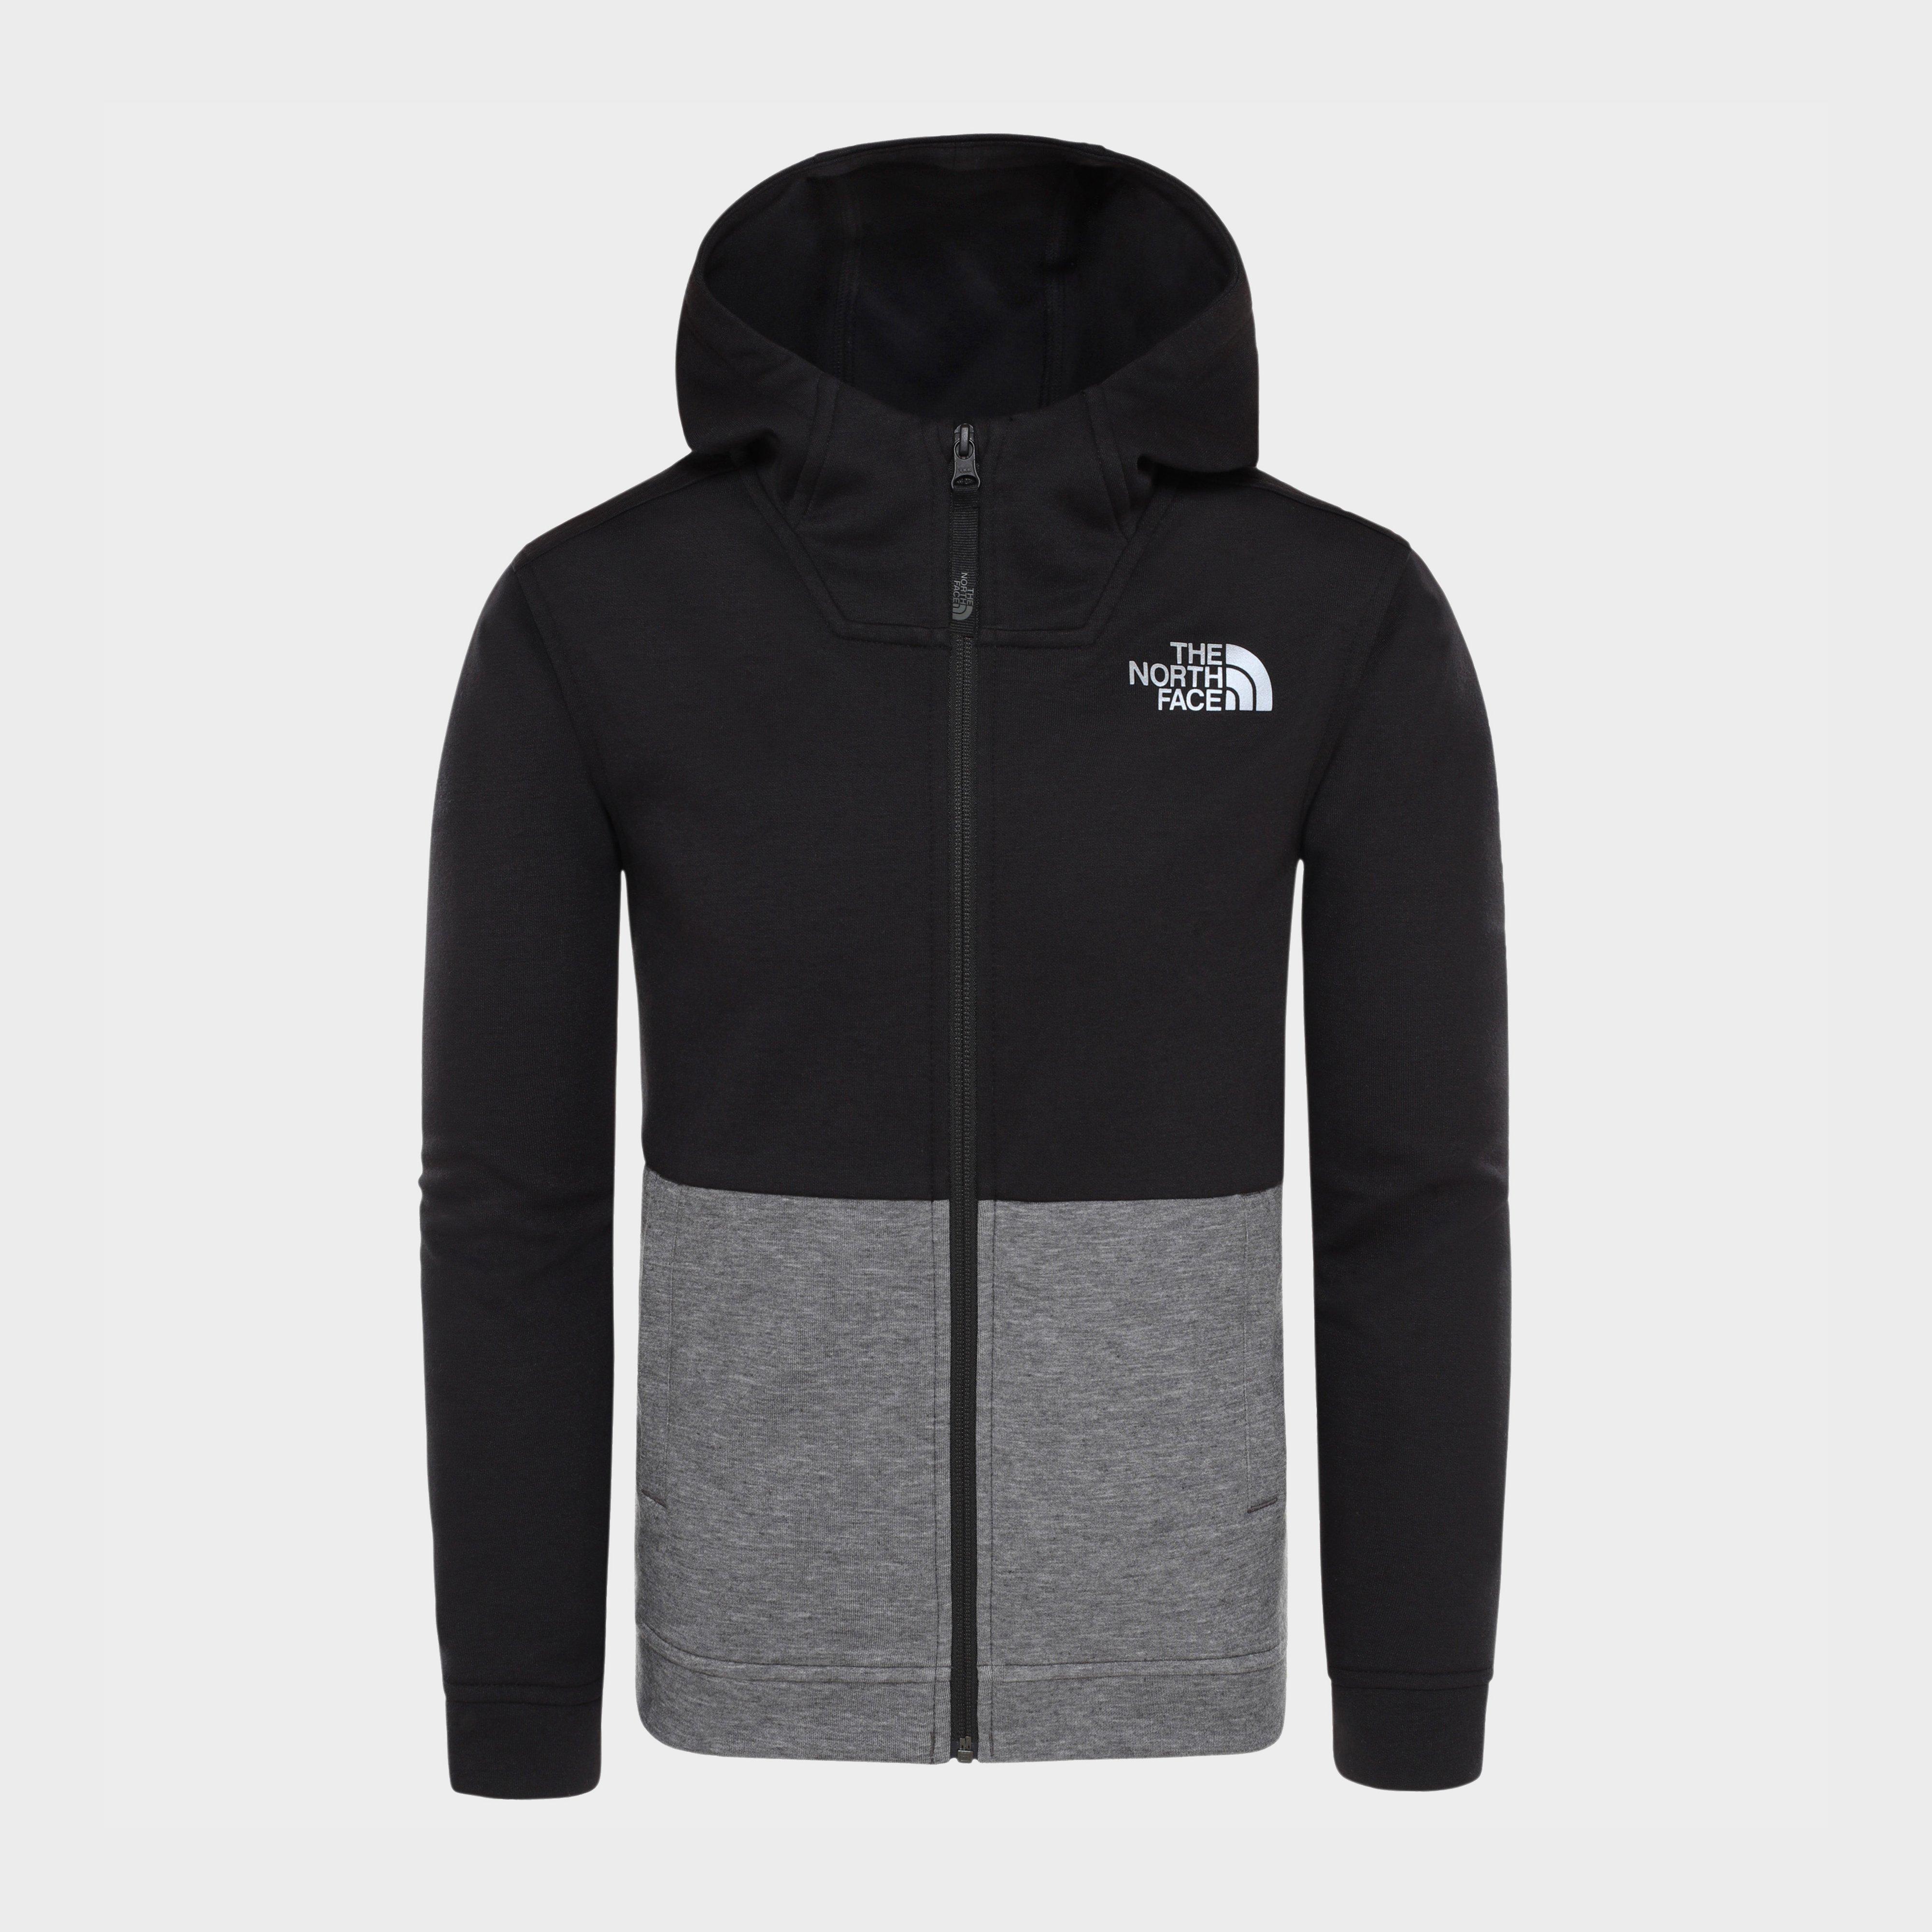 north face sweater kids